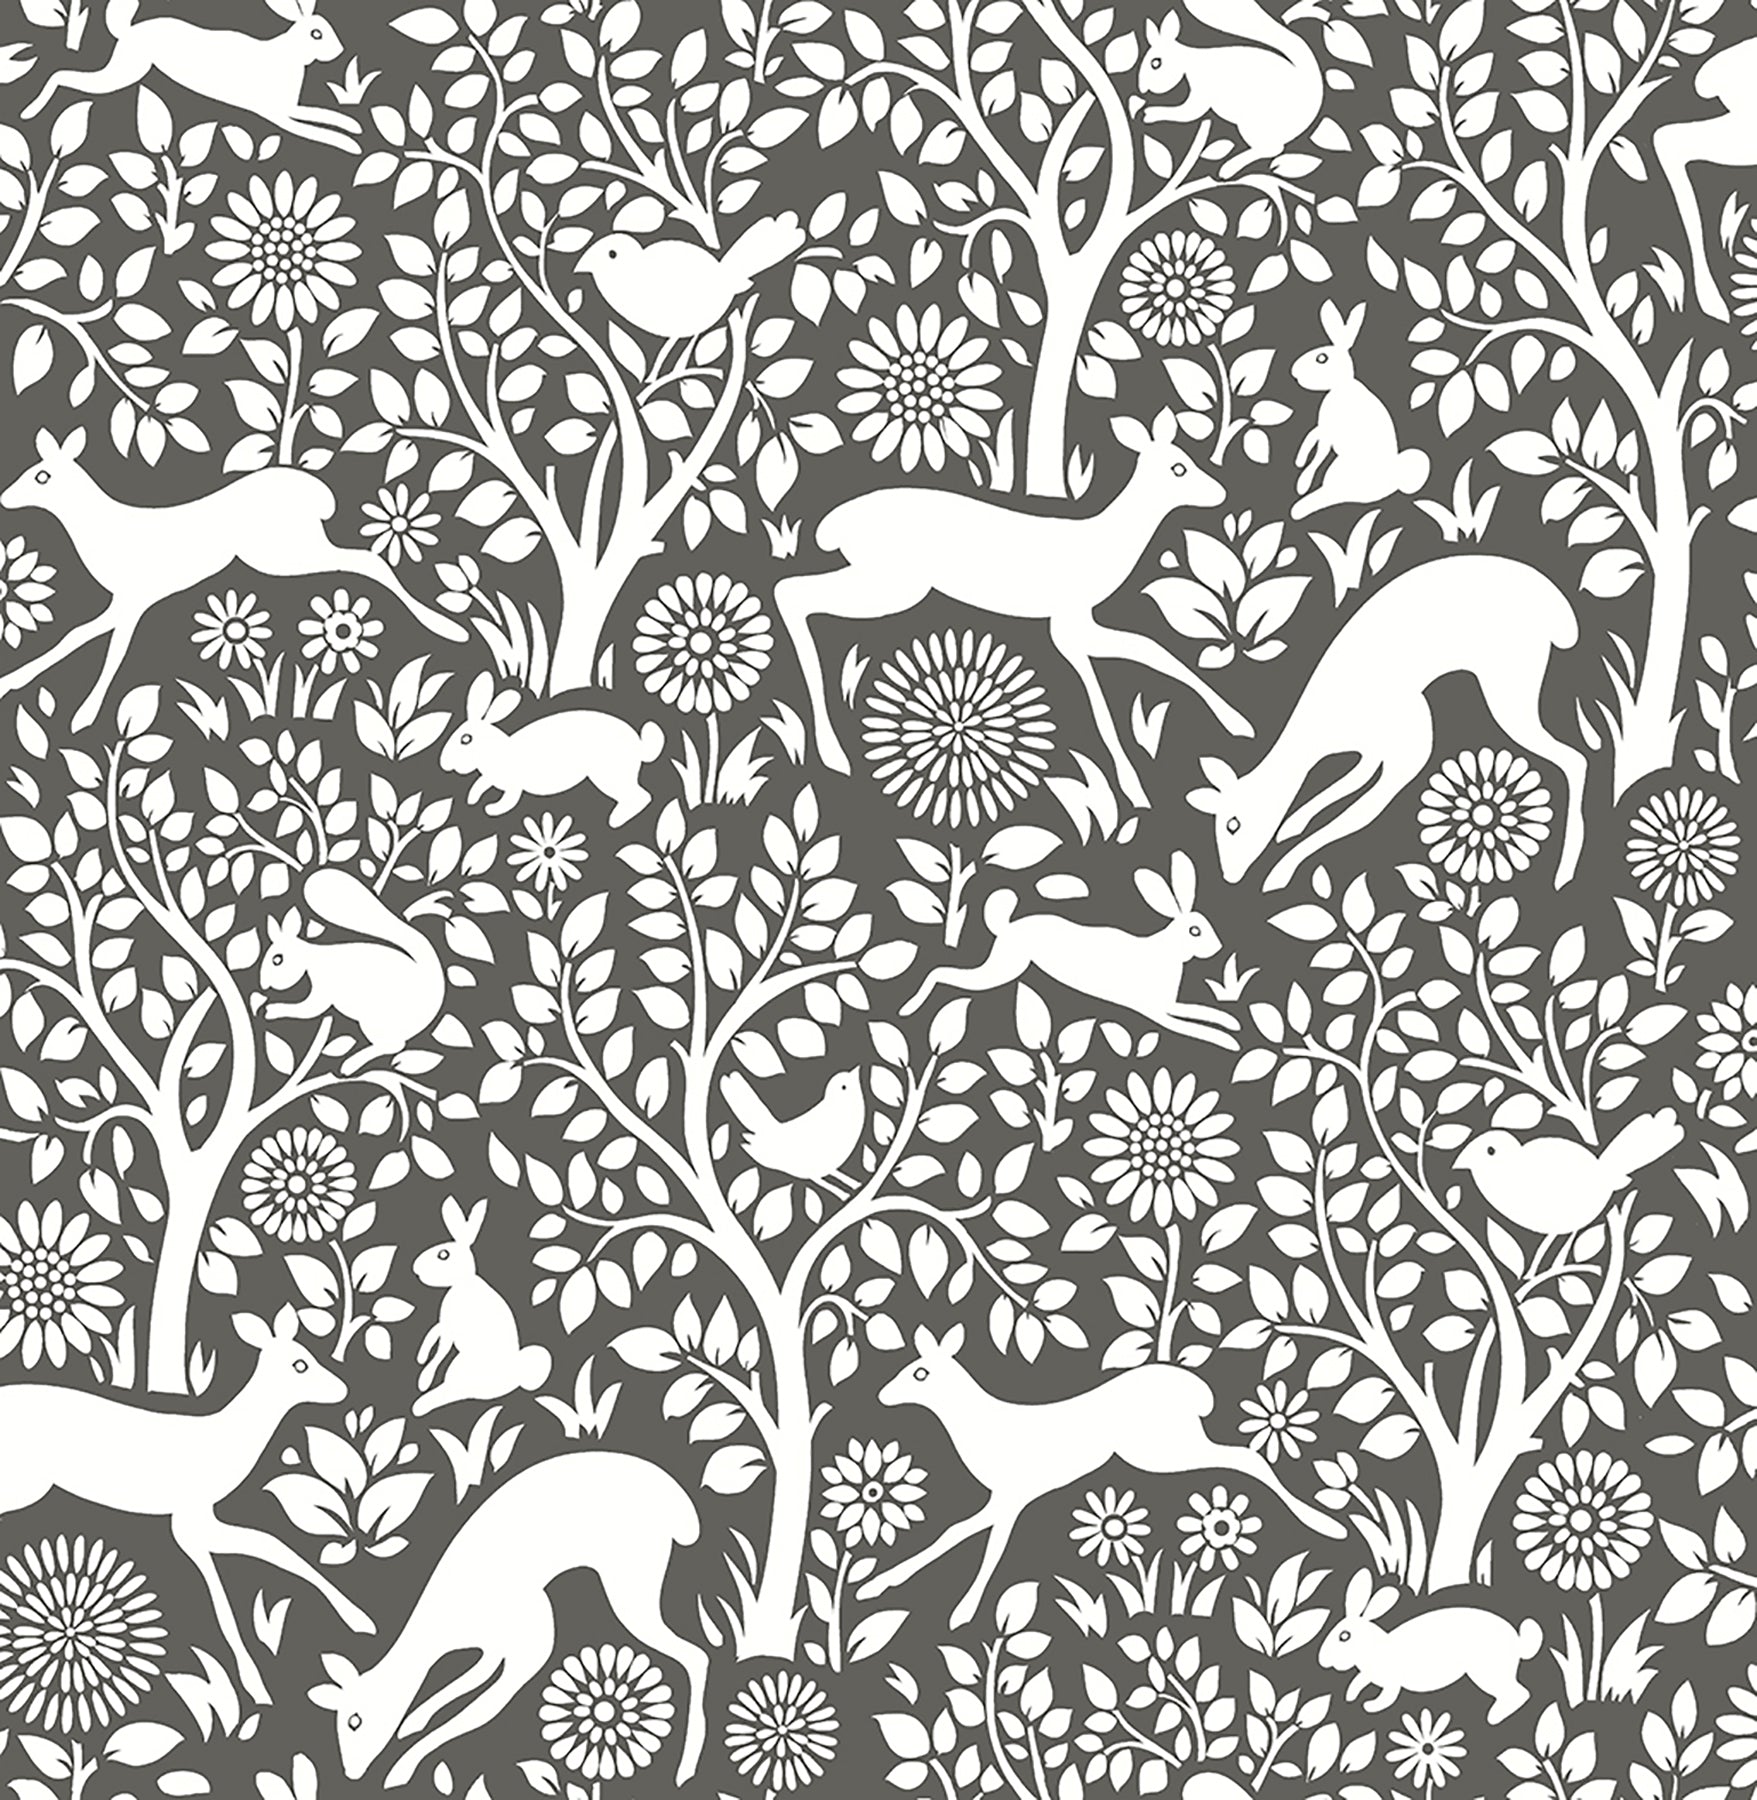 Buy 2702-22729 Meadow Charcoal Animals by A-Street Prints Wallpaper